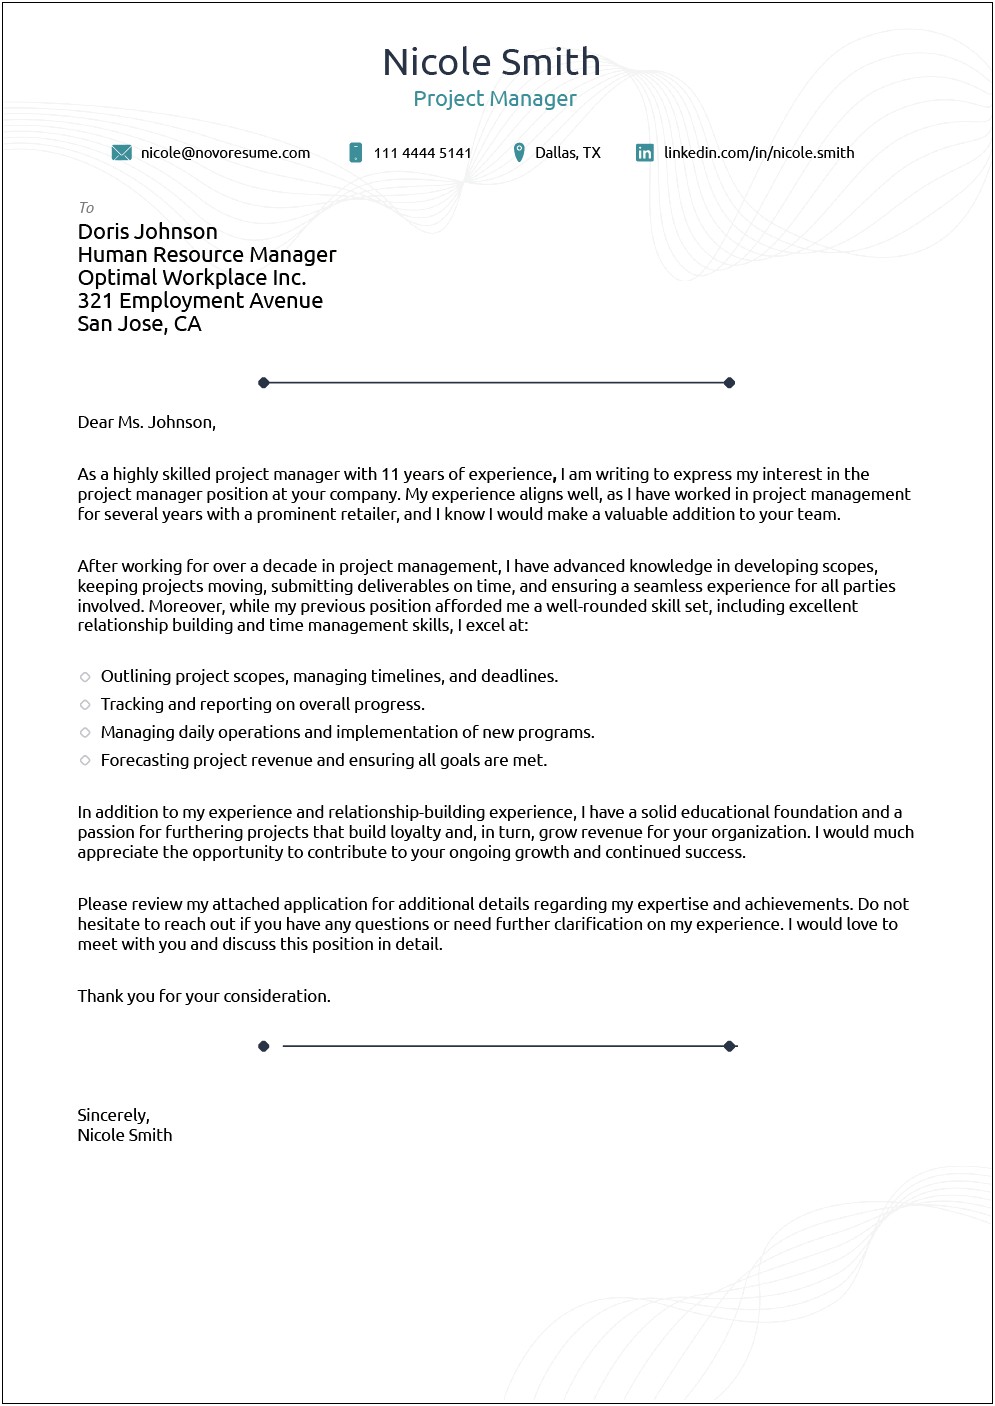 Resume Cover Letter Closing Lines Examples